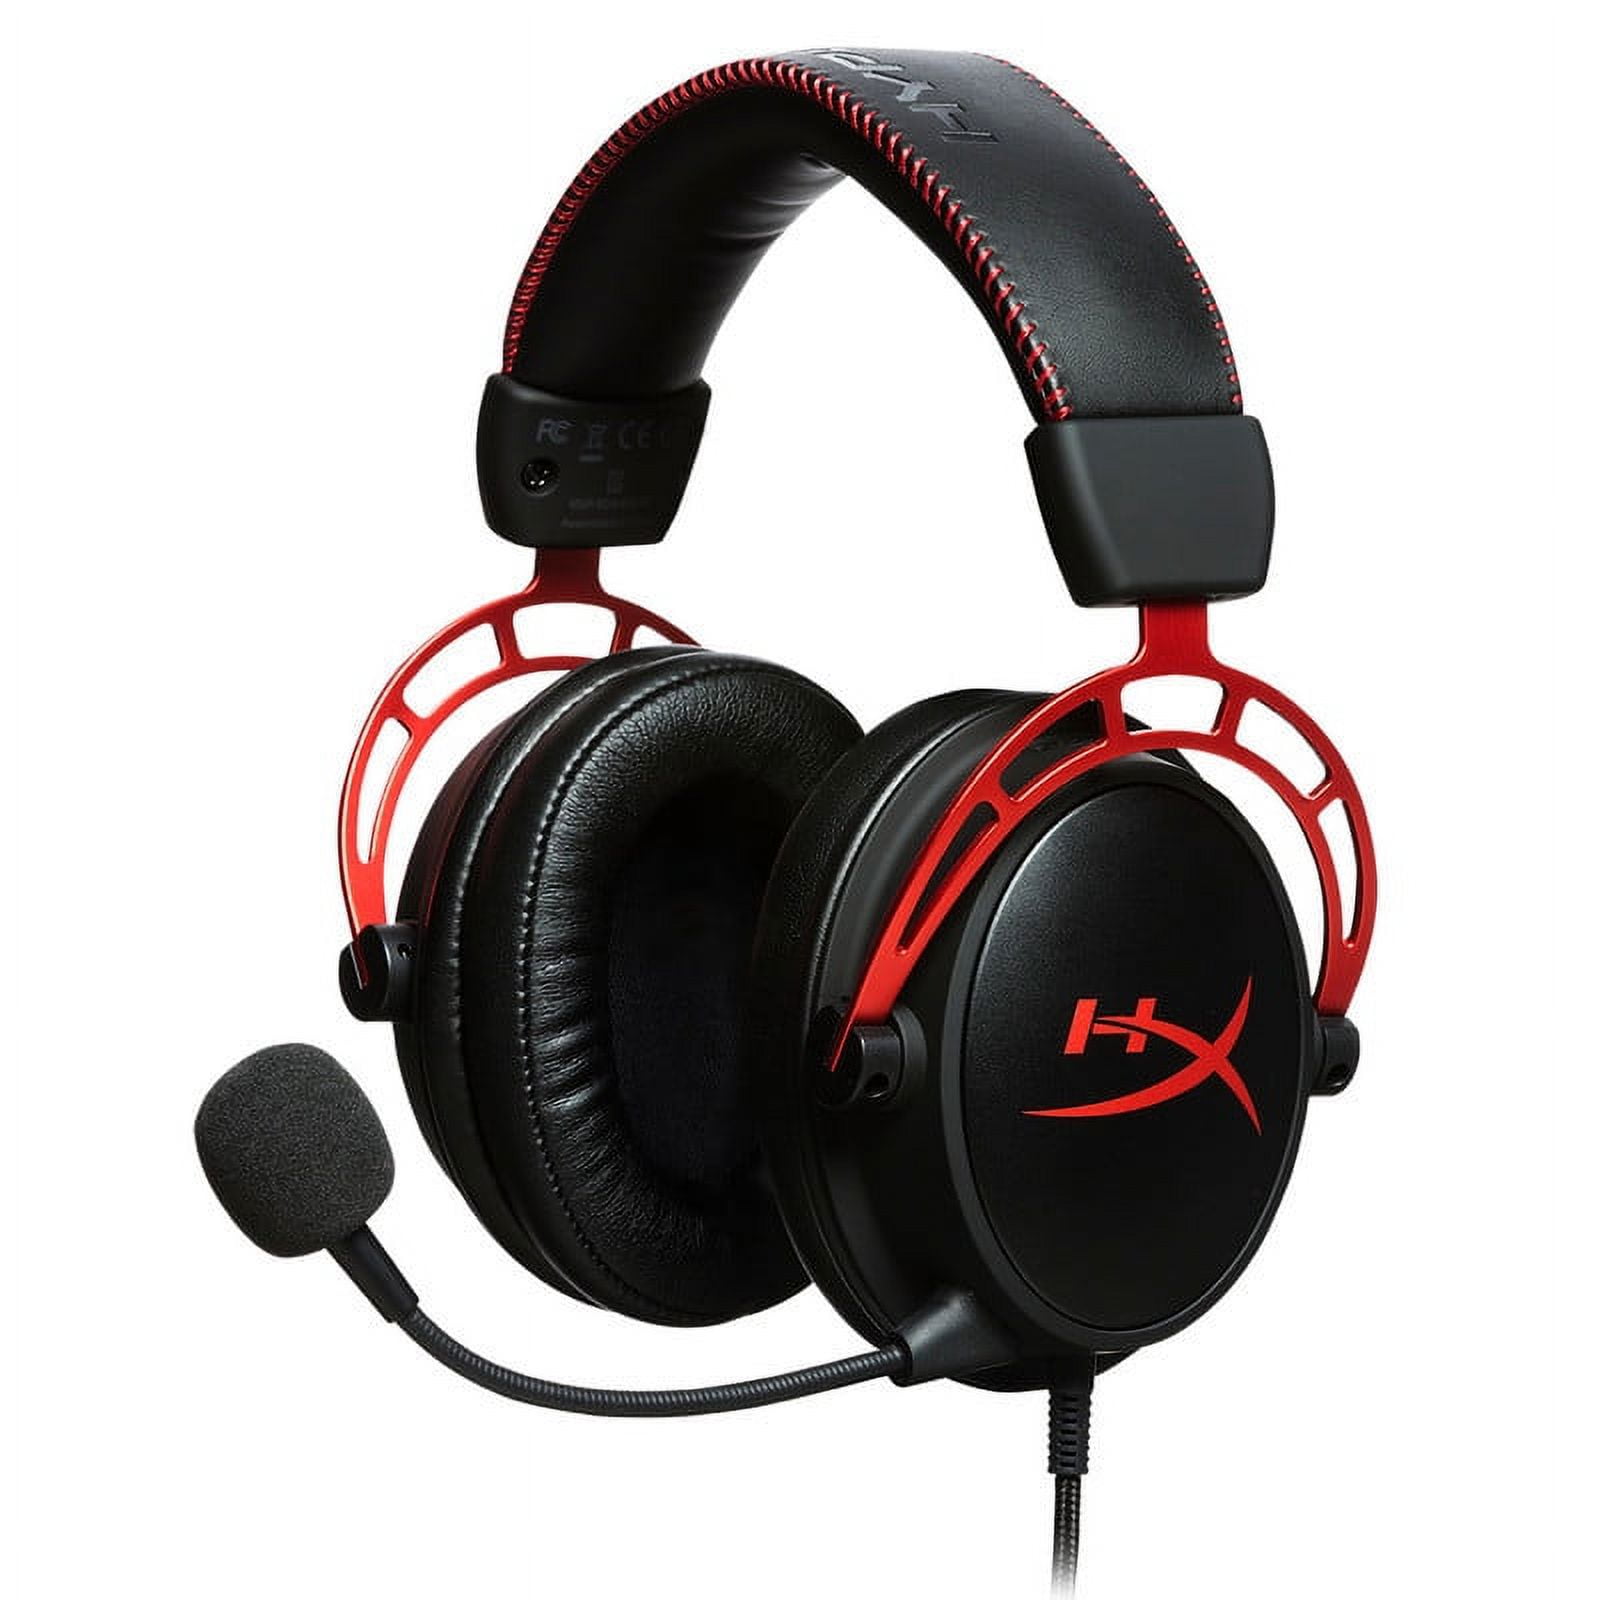 Casque micro Pro Gaming HyperX Cloud Silver - Casque PC - Achat